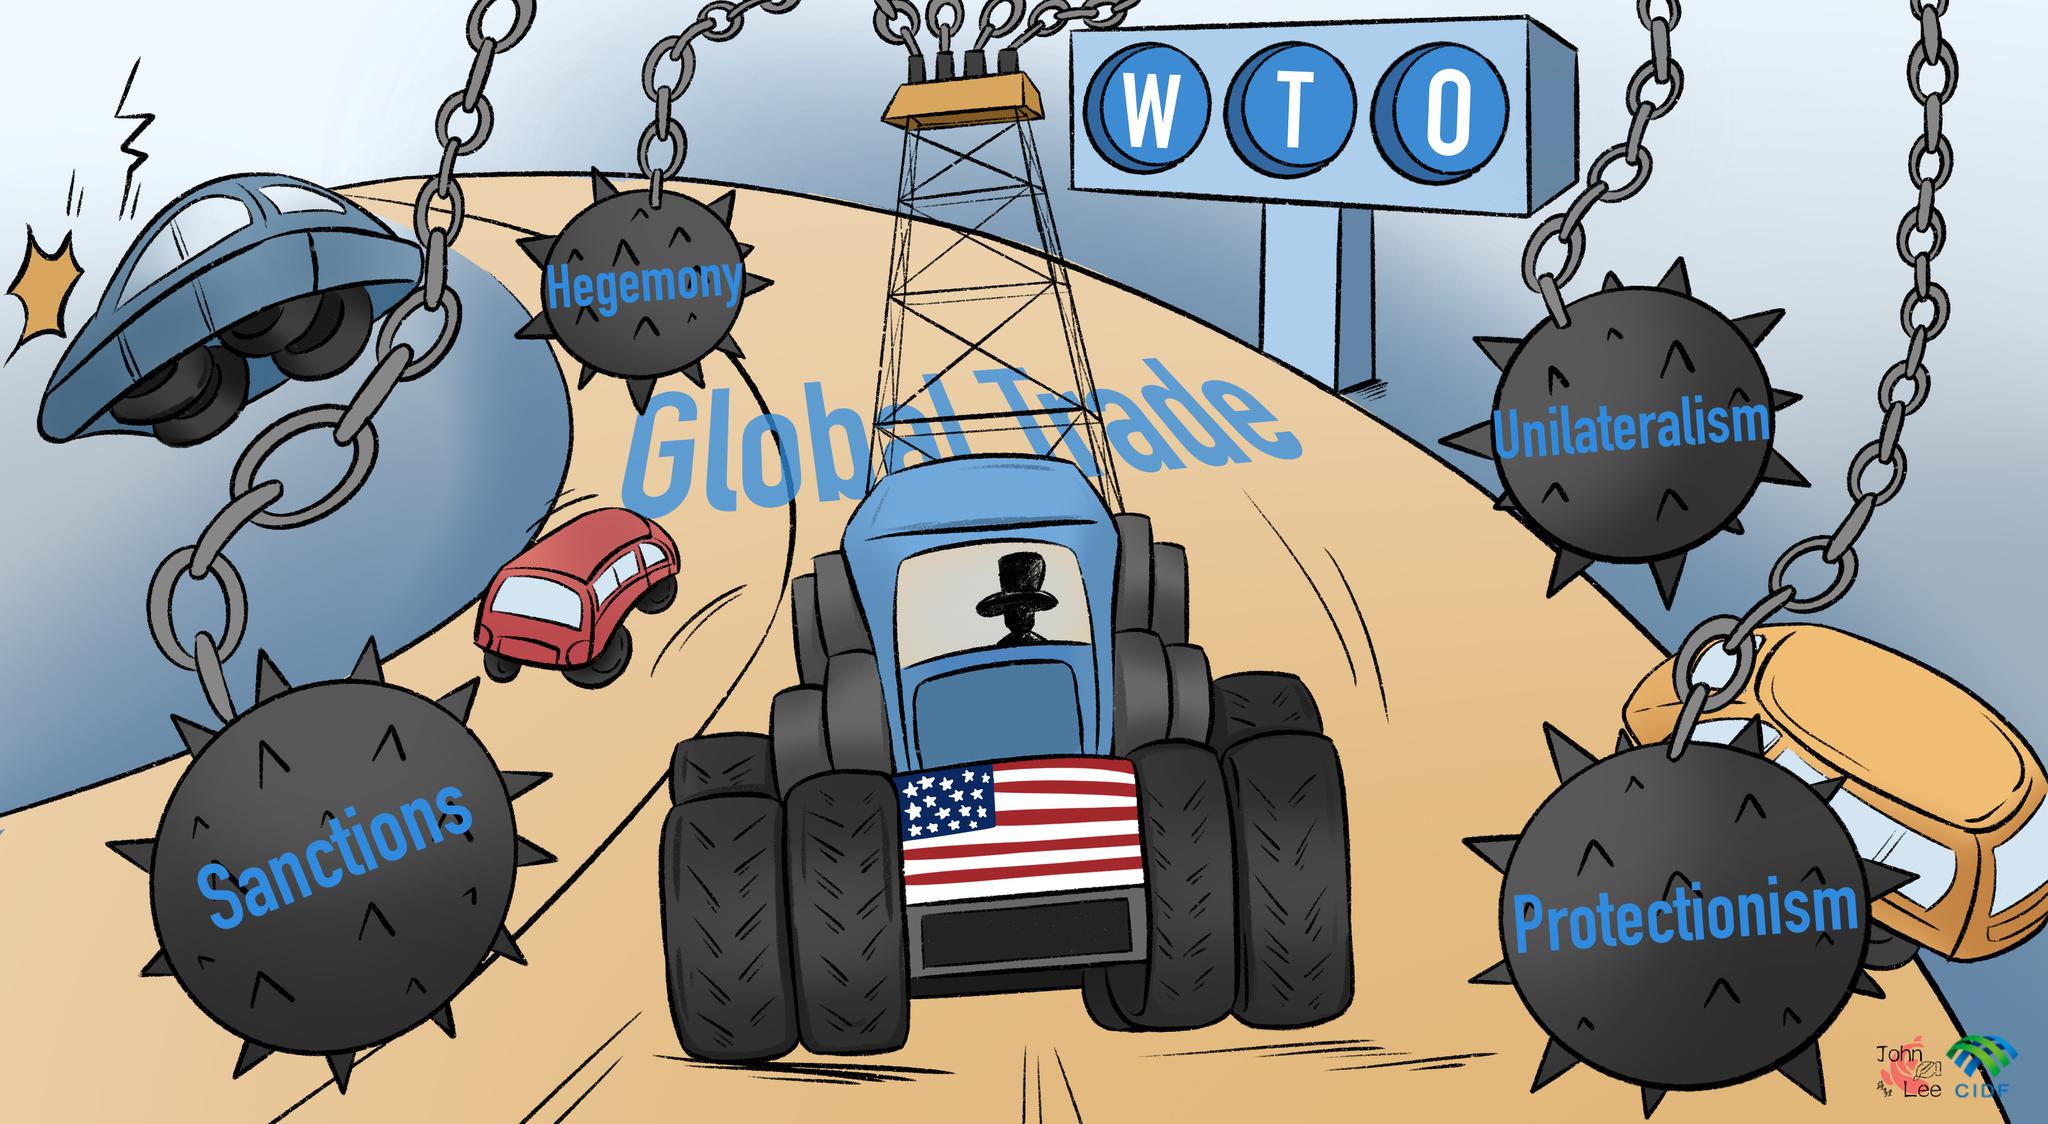 ECNS — Comicomment: U.S. unilateralism, trade protectionism harm global trade